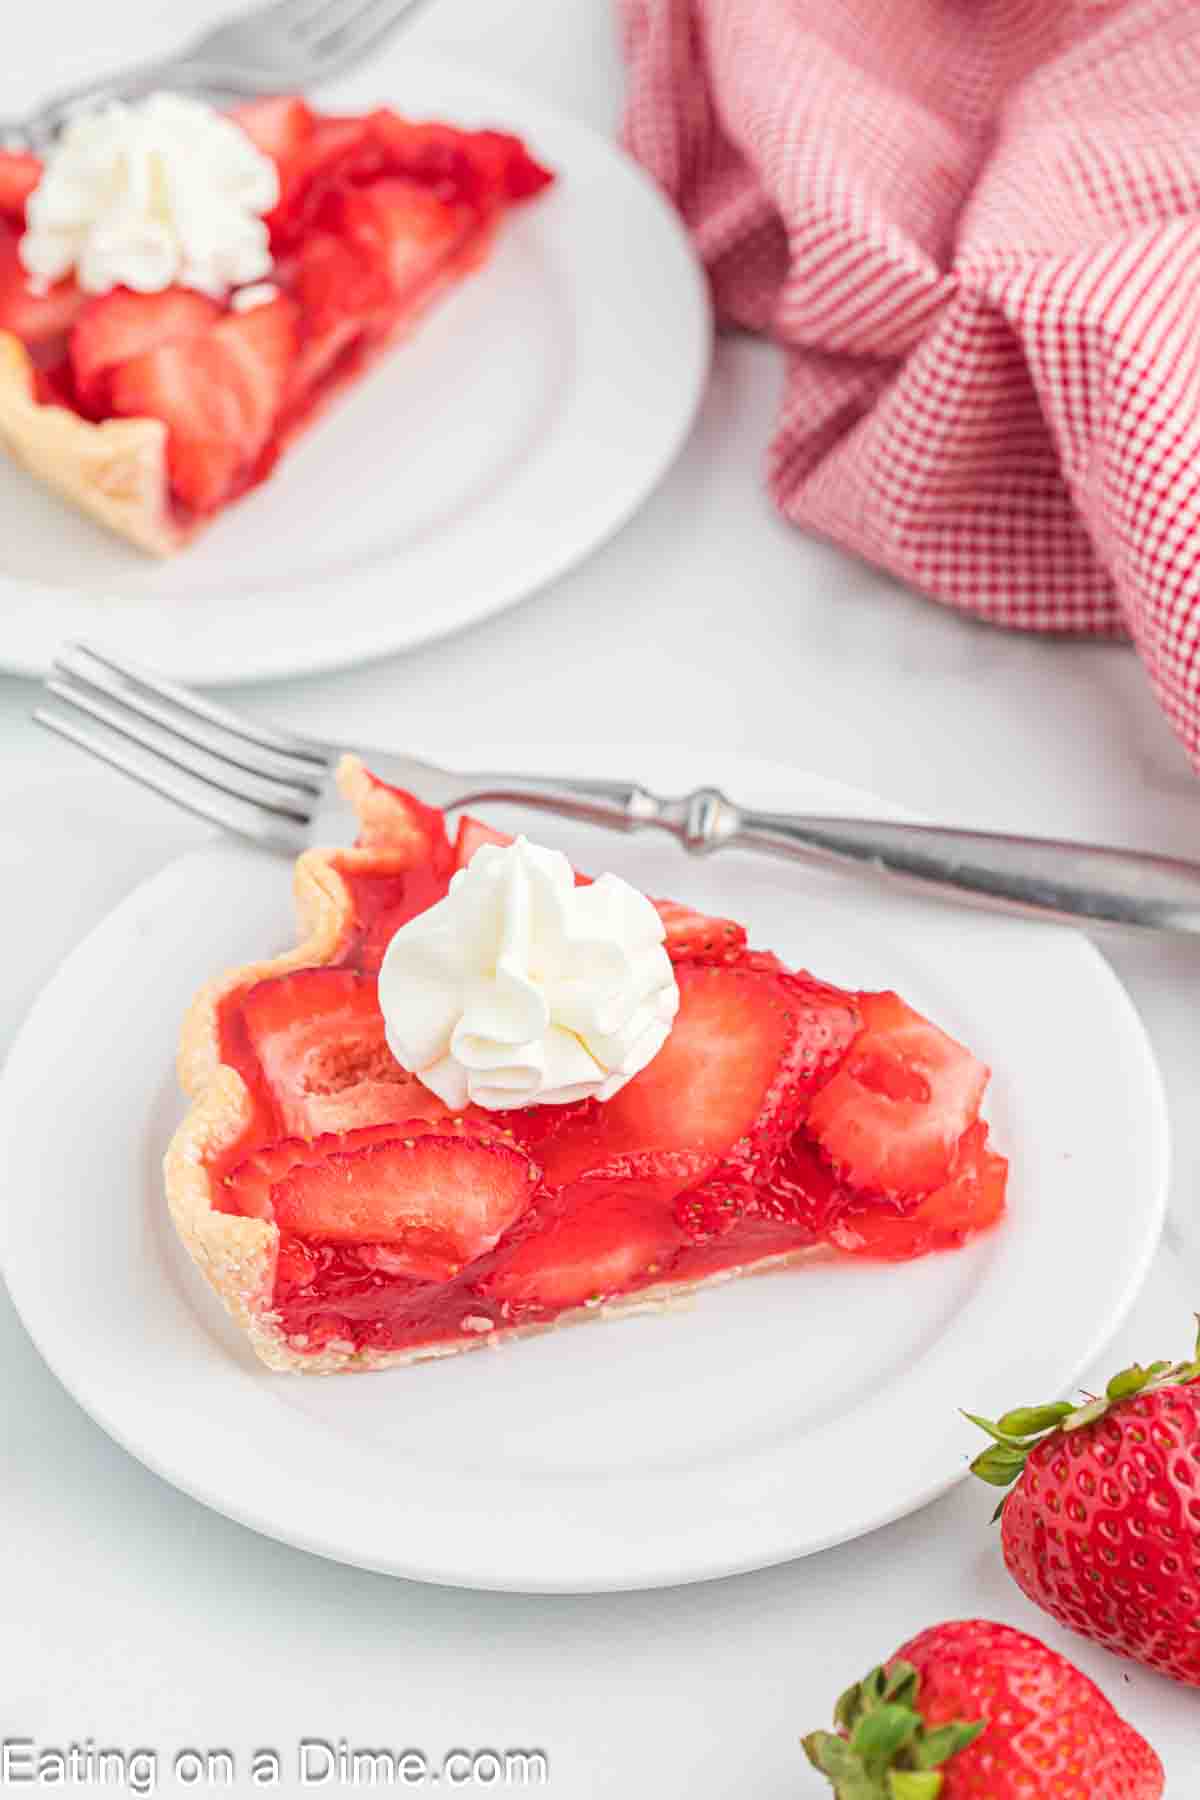 Slice of strawberry pie on a plate